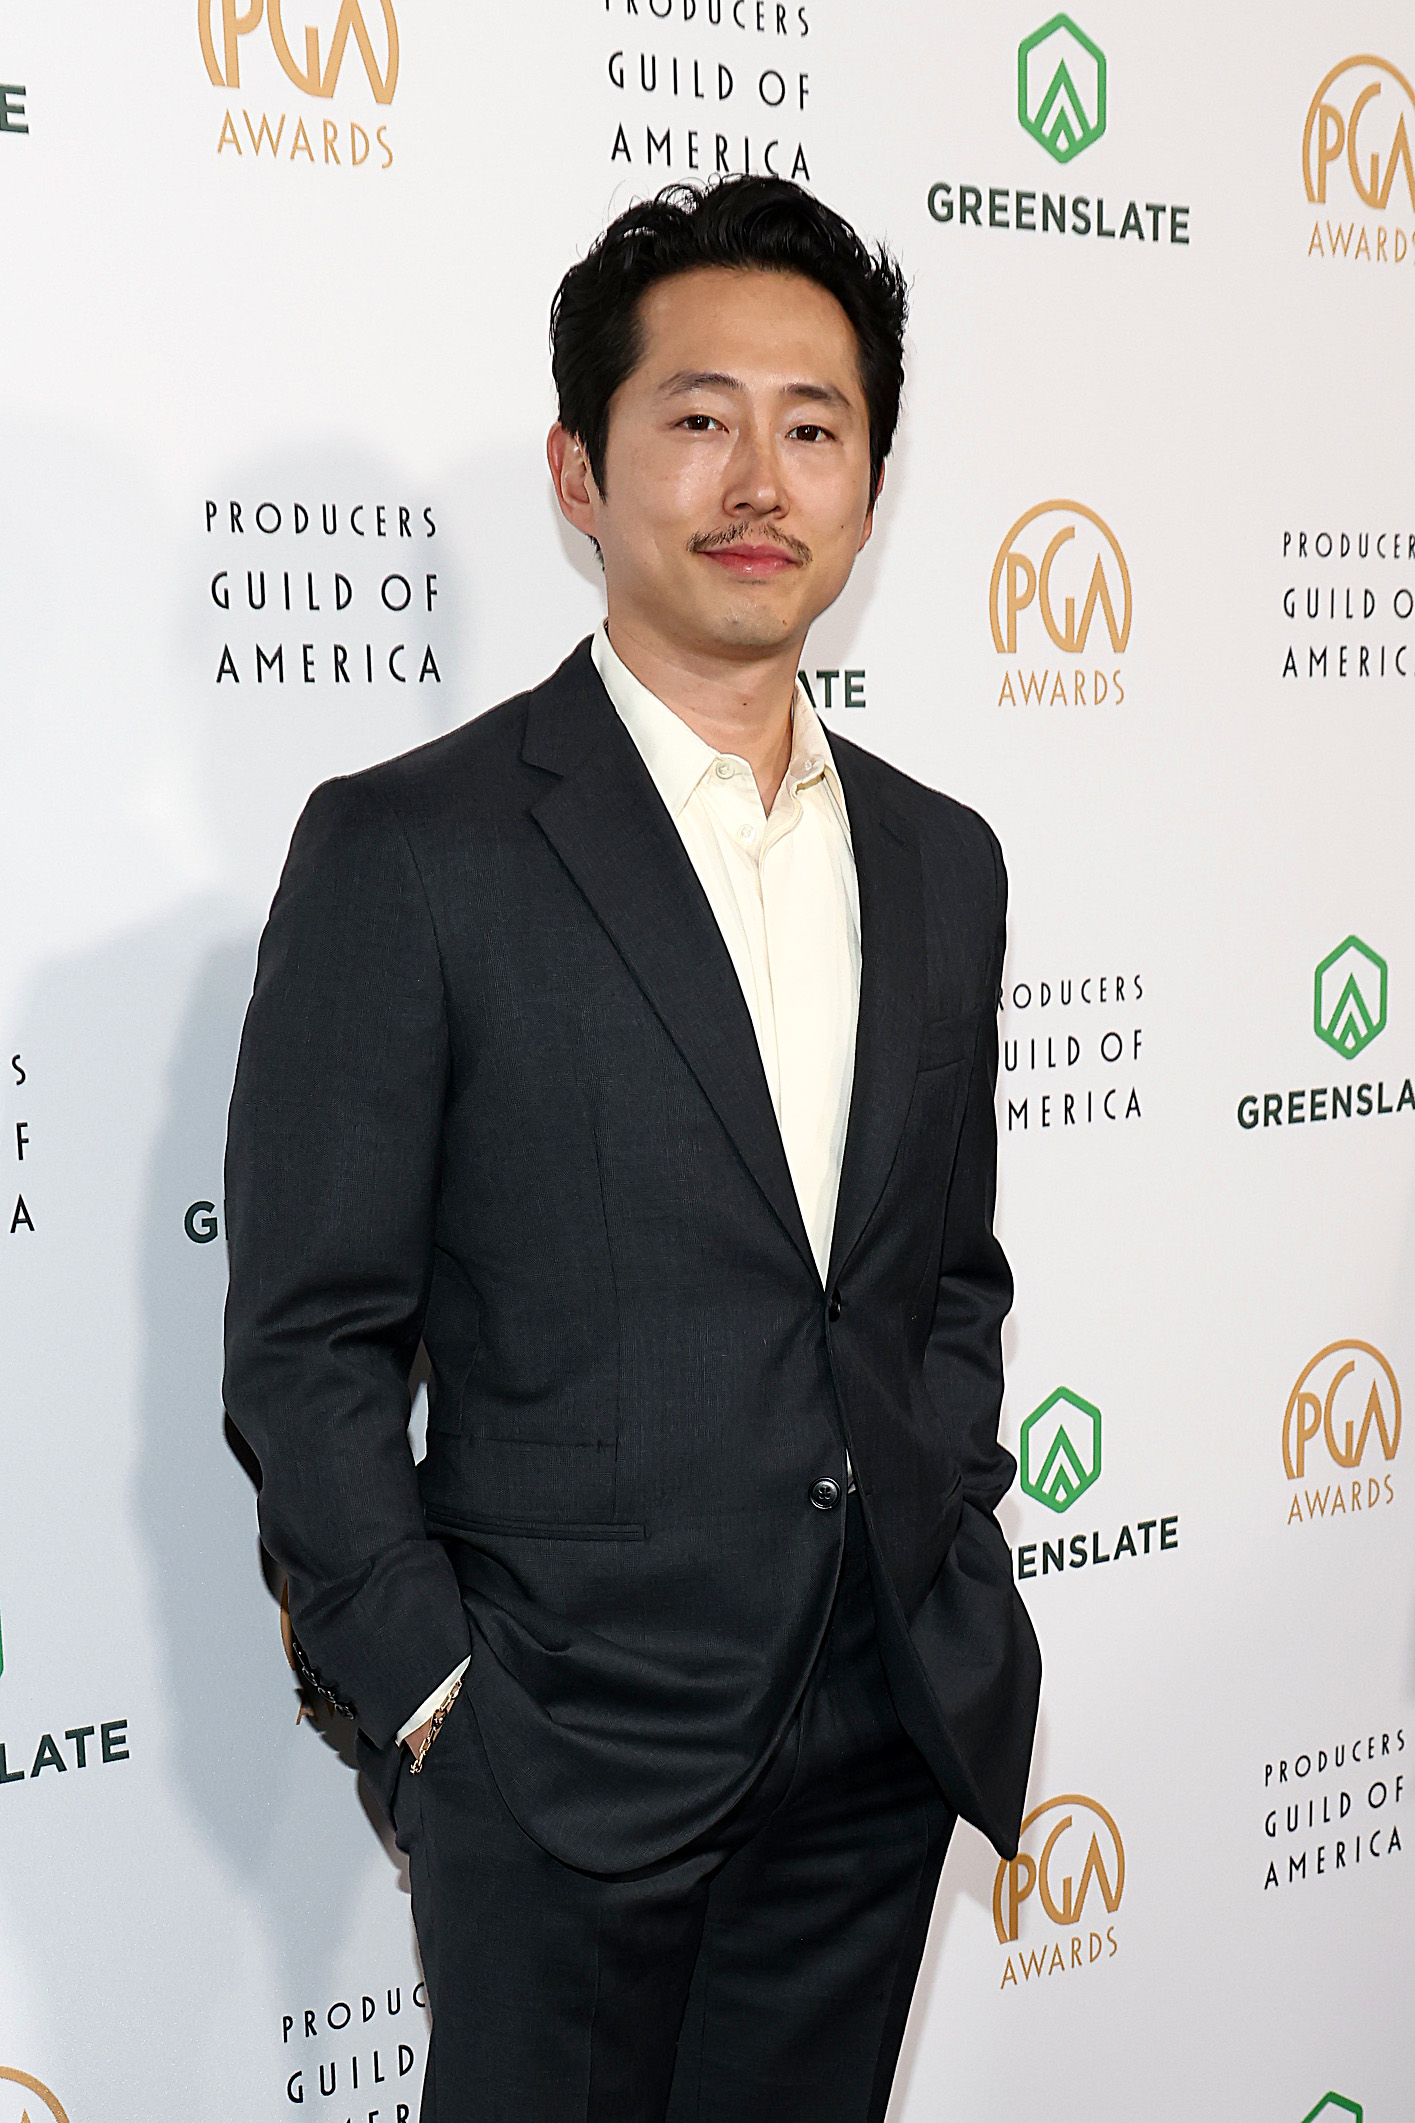 Steven in tailored suit sans tie poses at the Producers Guild Awards